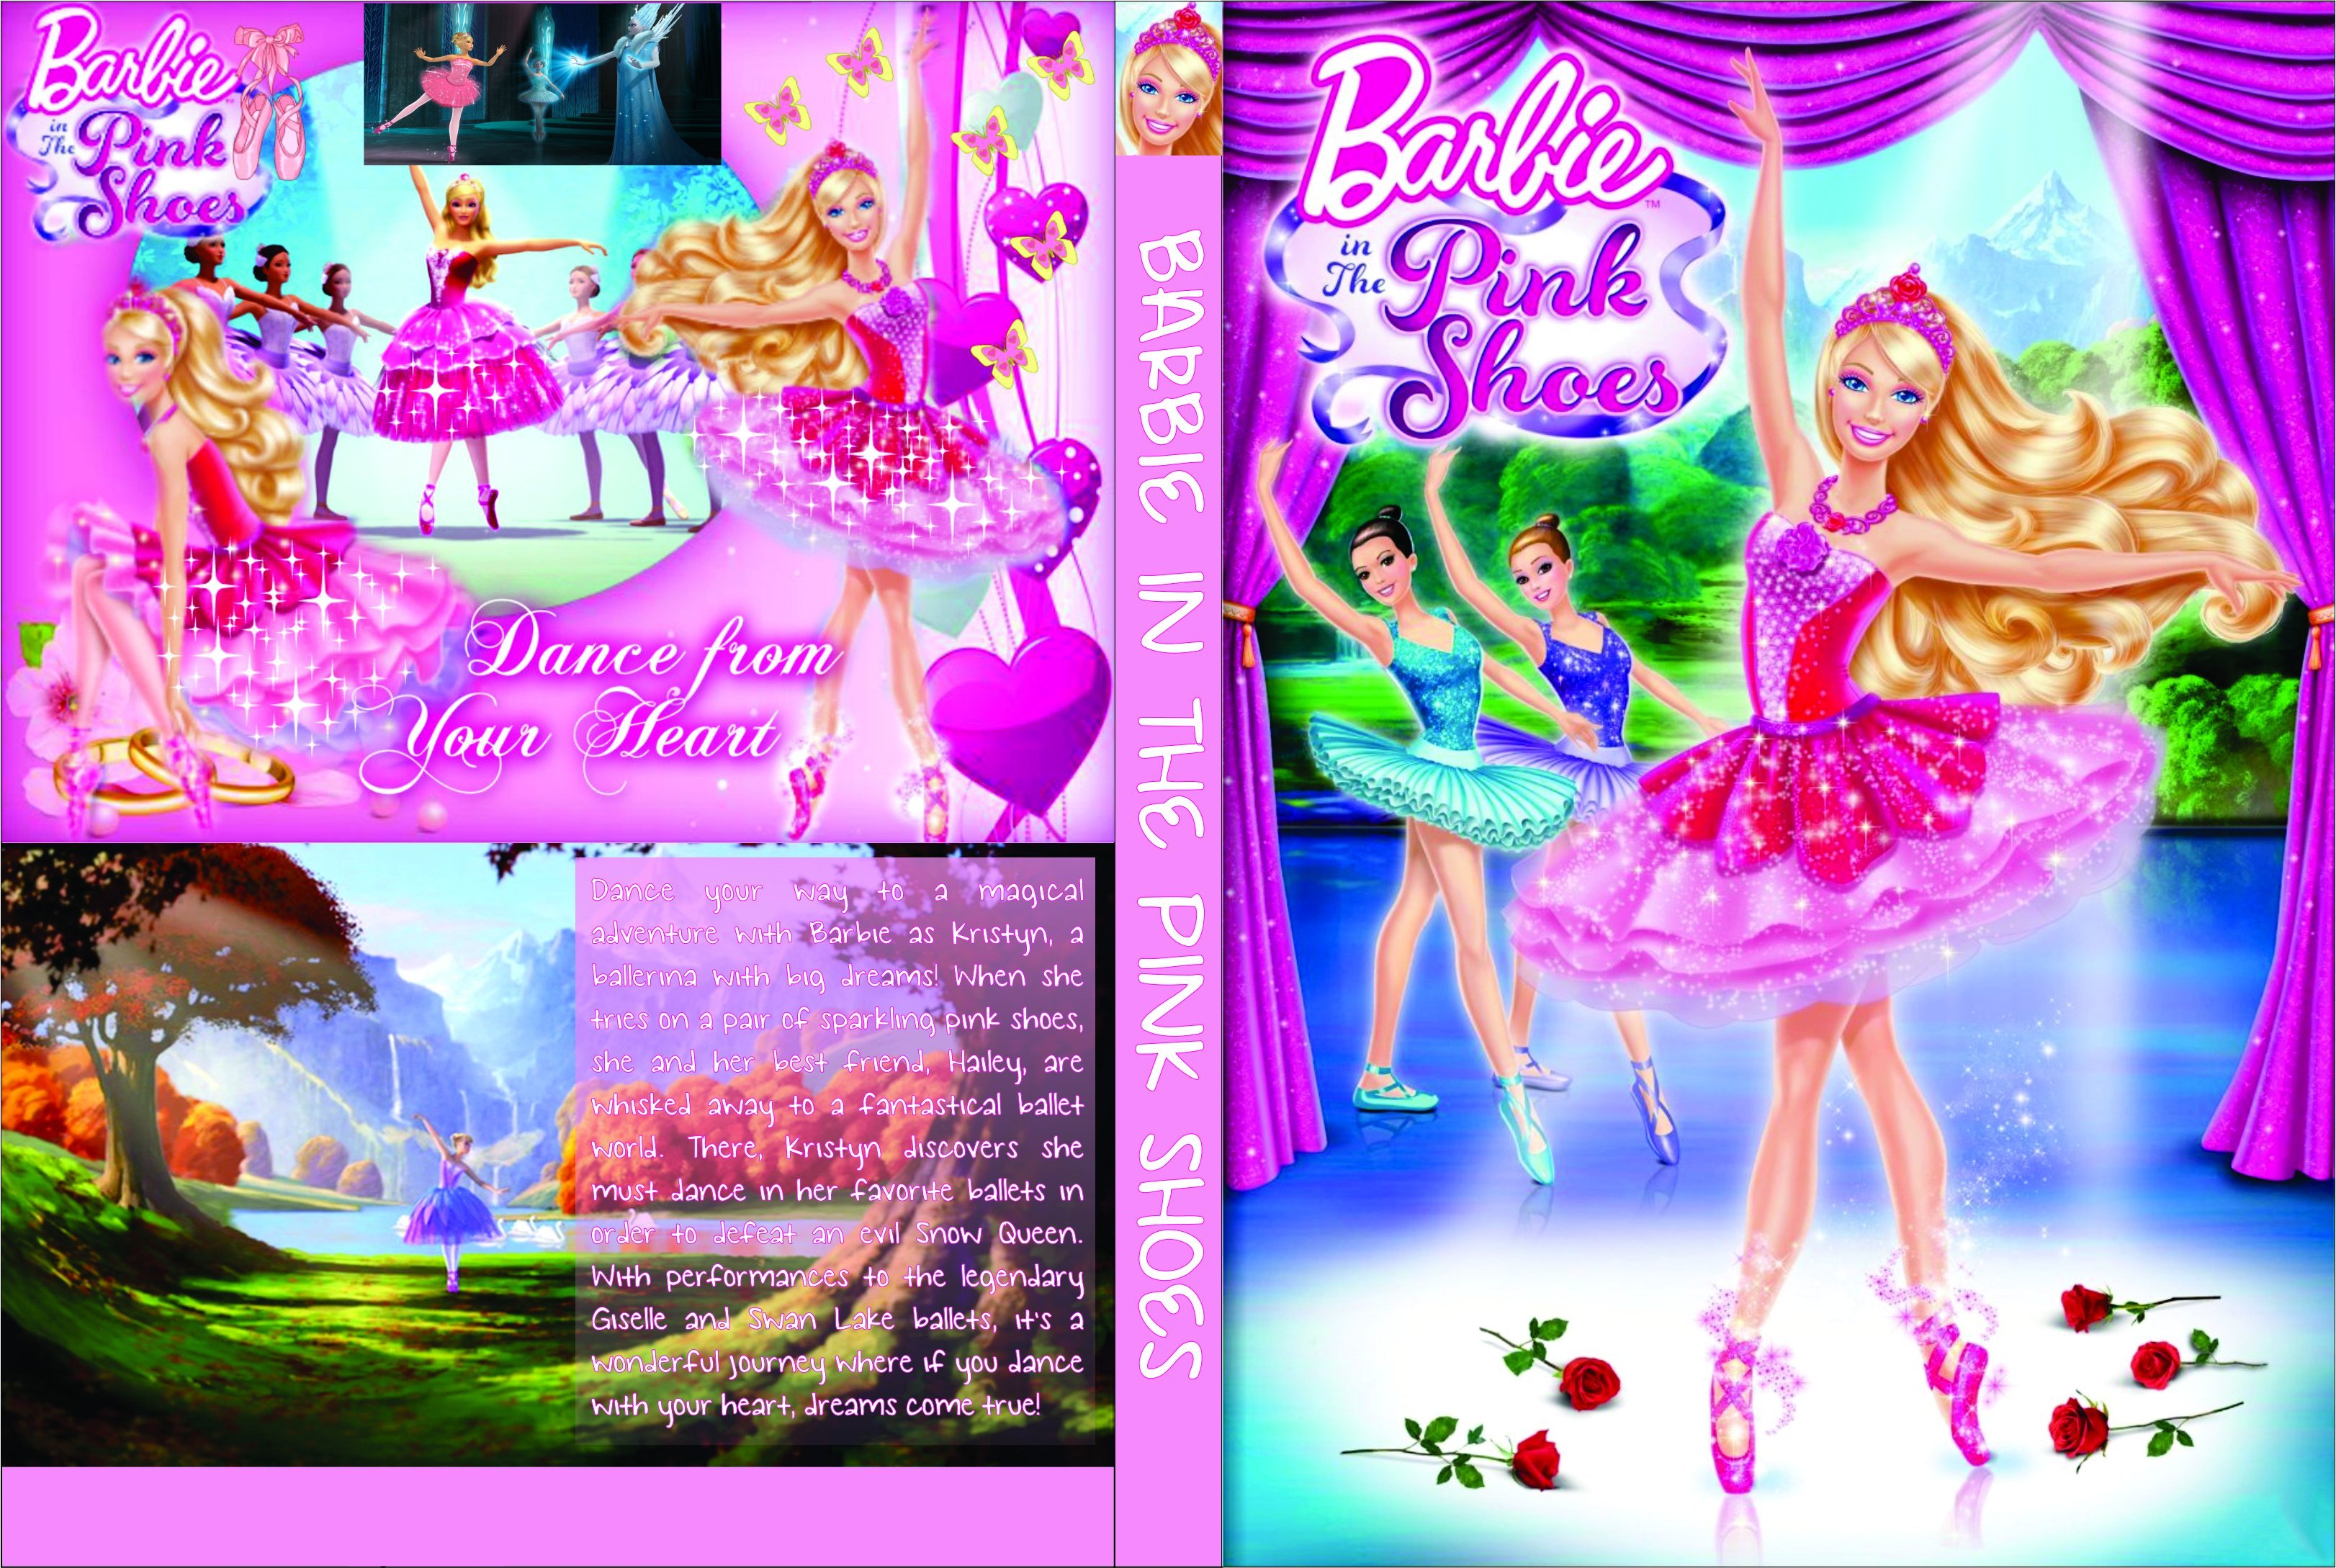 barbie in pink shoes full movie in hindi